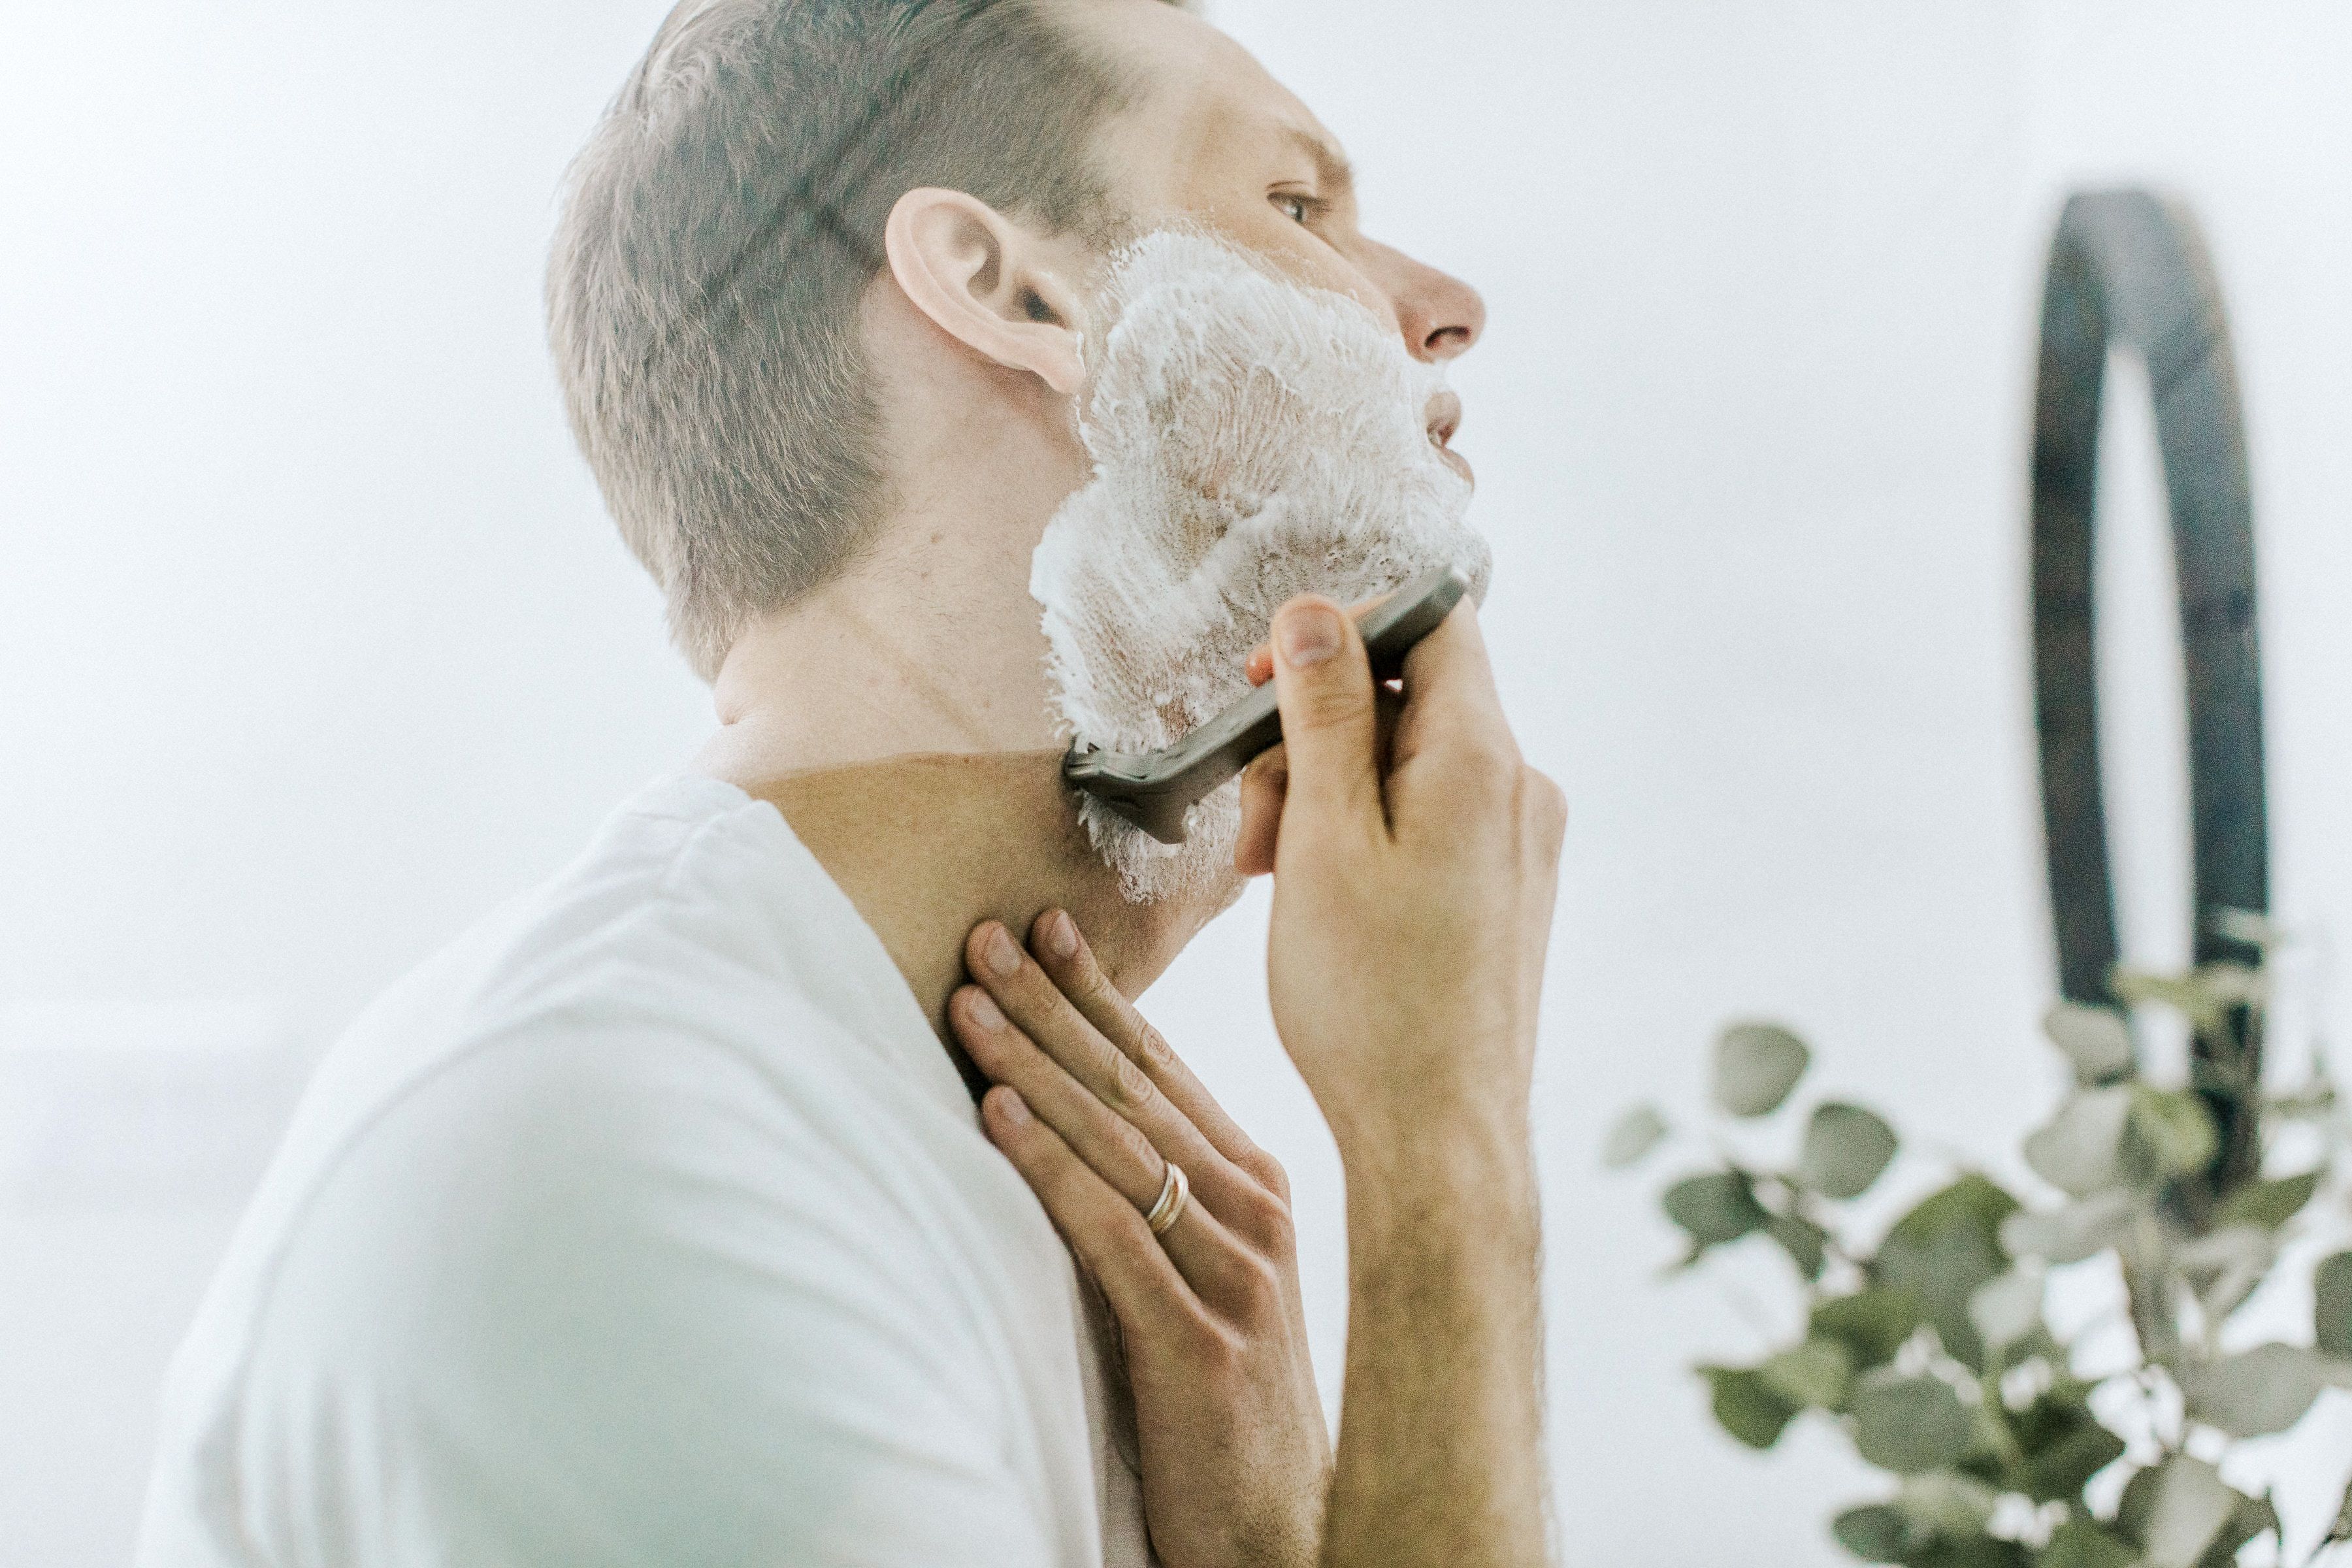 Beauty Awards 2019: The Hottest Men’s Products to Add to Your Grooming Arsenal